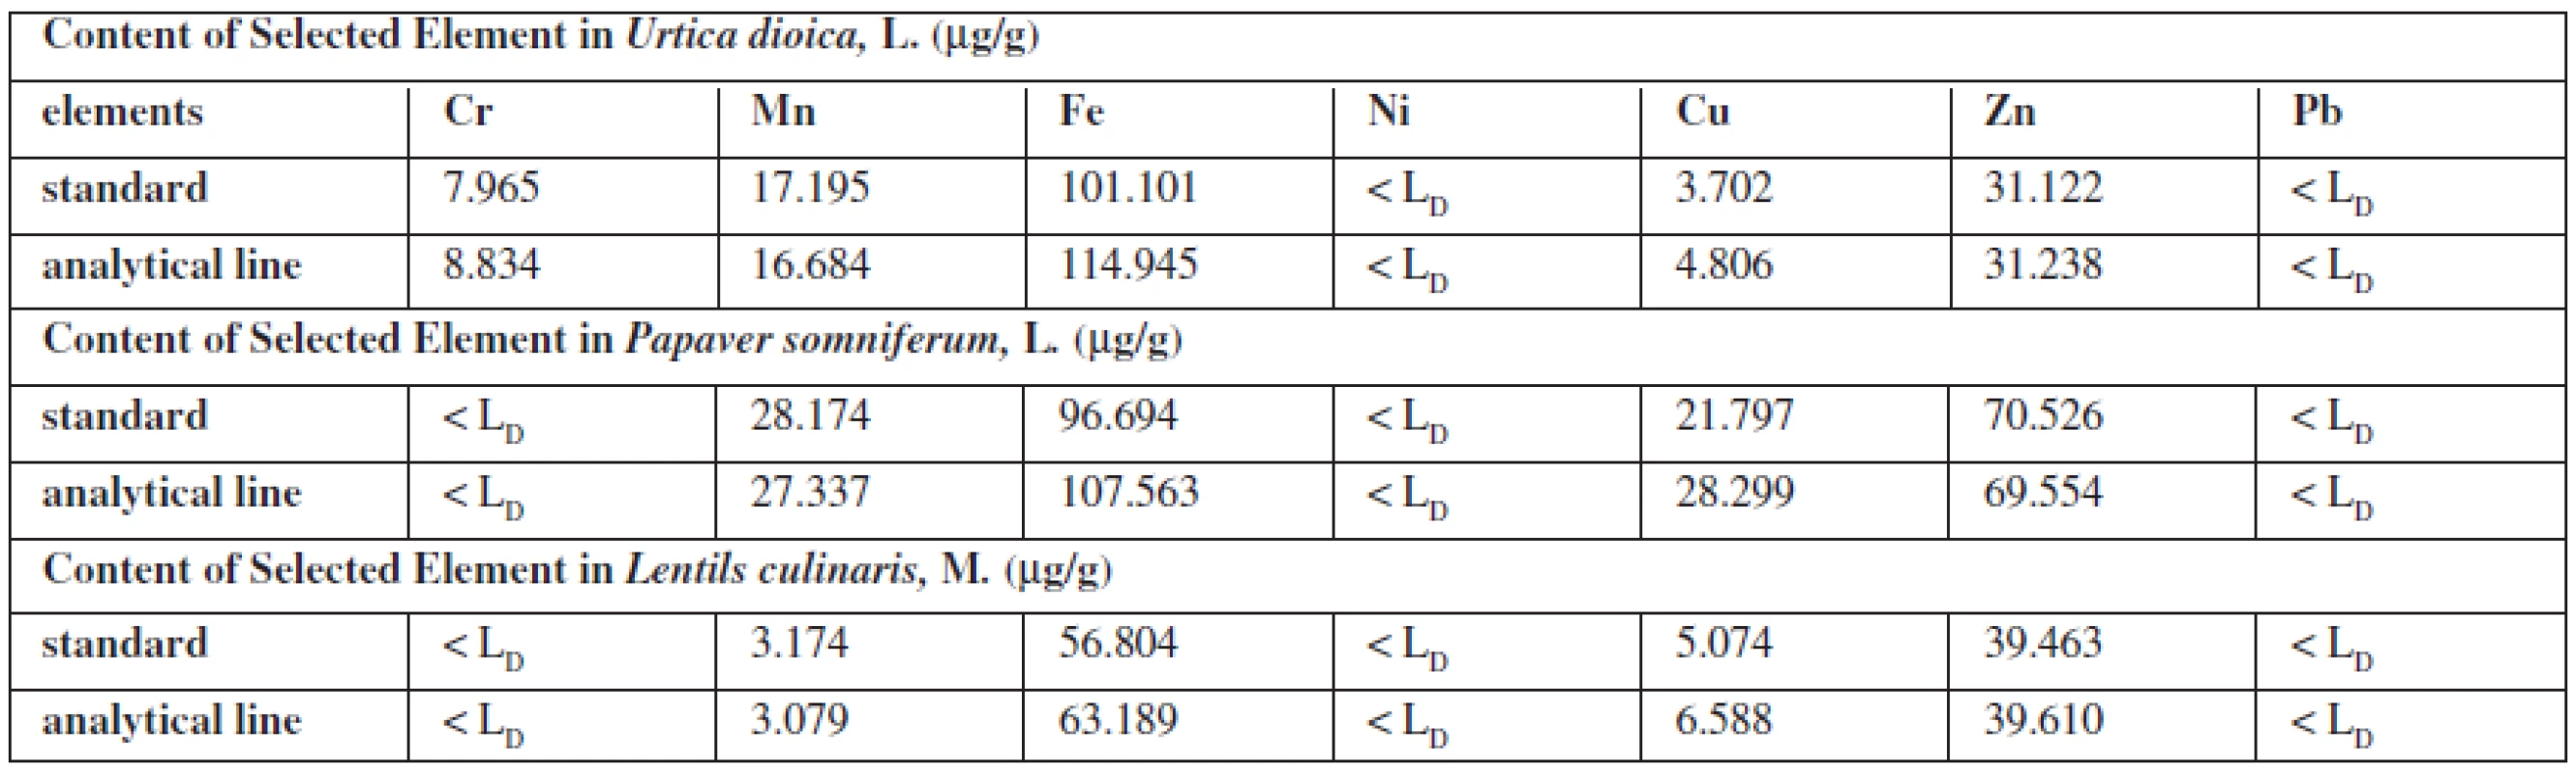 Content of elements in plant samples (μg/g) calculated from the standards or from analytical lines on own samples